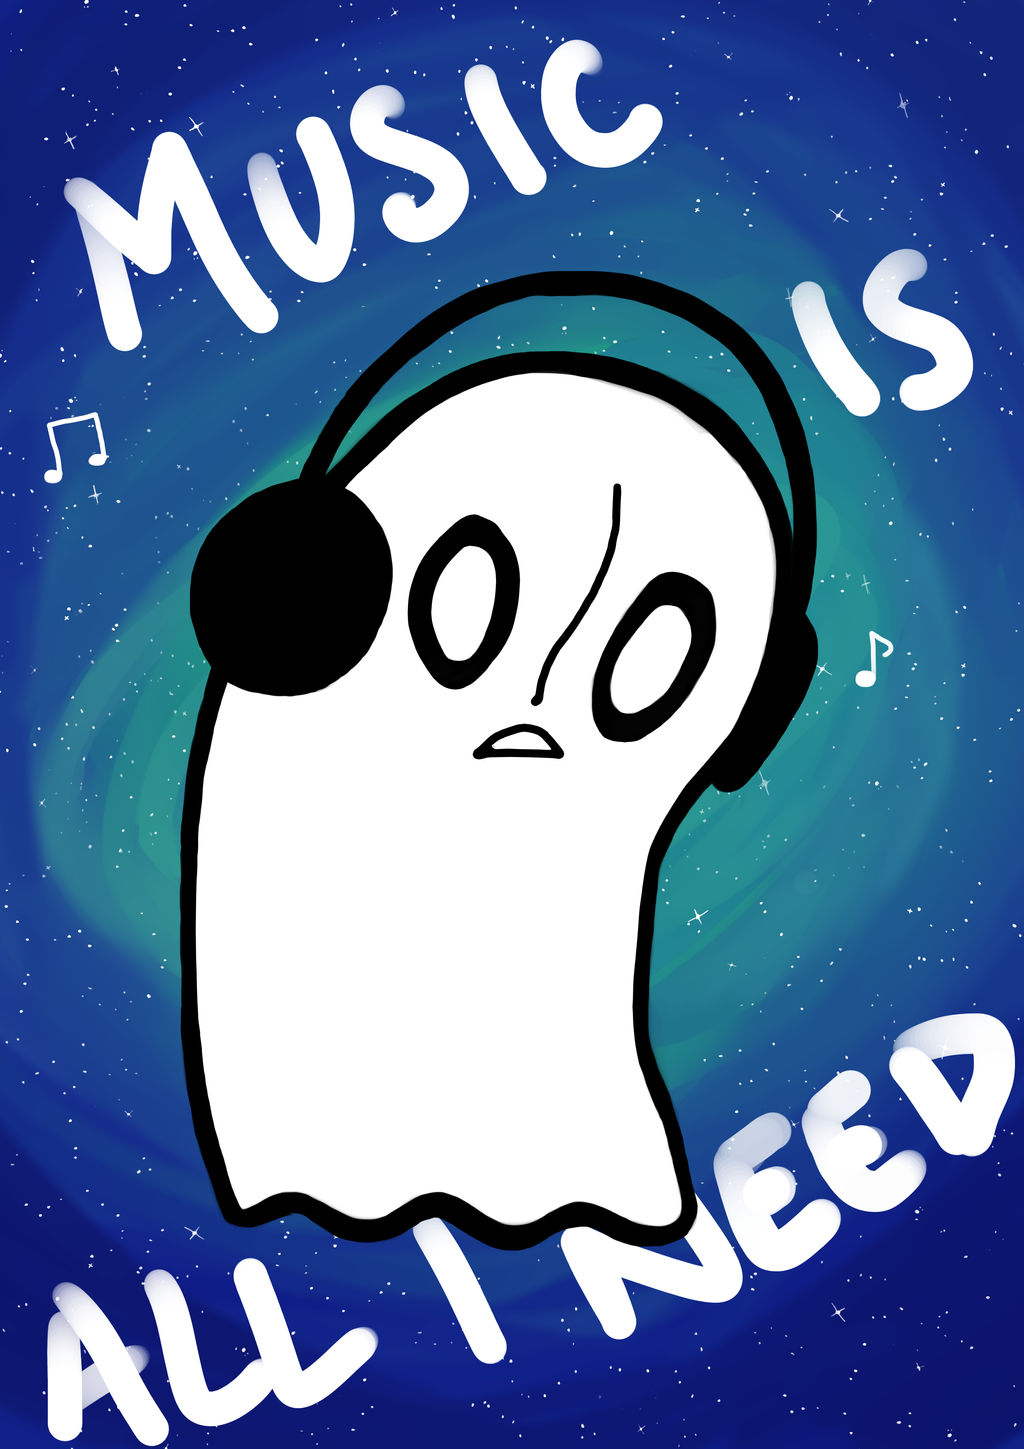 Napstablook - music is all I need